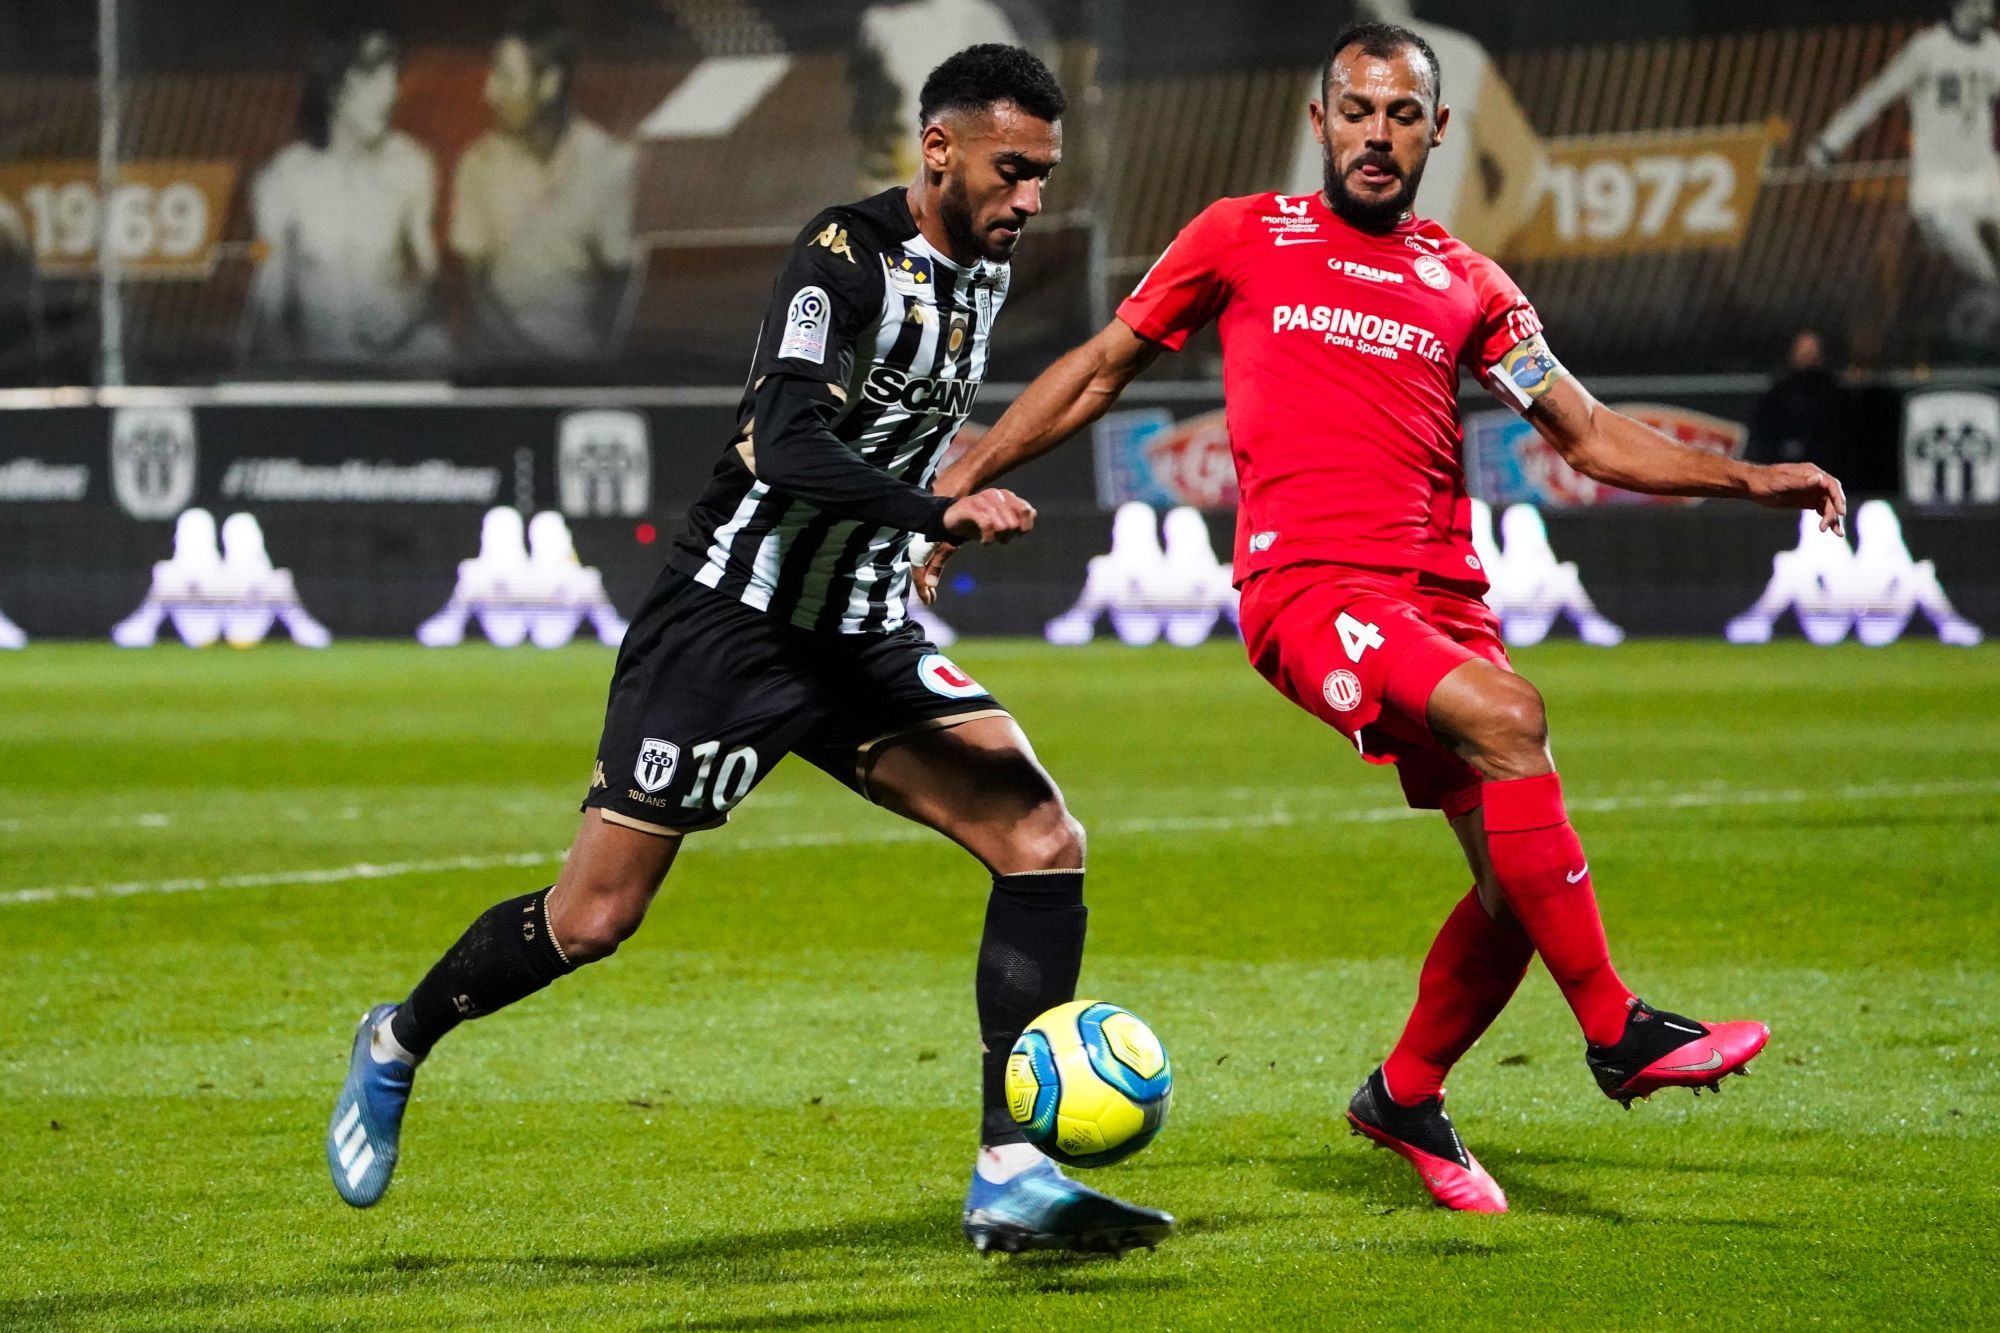 Angelo FULGINI of Angers and Vitorino HILTON of Montpellier during the Ligue 1 match between Angers SCO and Montpellier HSC at Stade Raymond Kopa on February 22, 2020 in Angers, France. (Photo by Eddy Lemaistre/Icon Sport) - Vitorino HILTON - Angelo FULGINI - Stade Raymond Kopa - Angers (France)